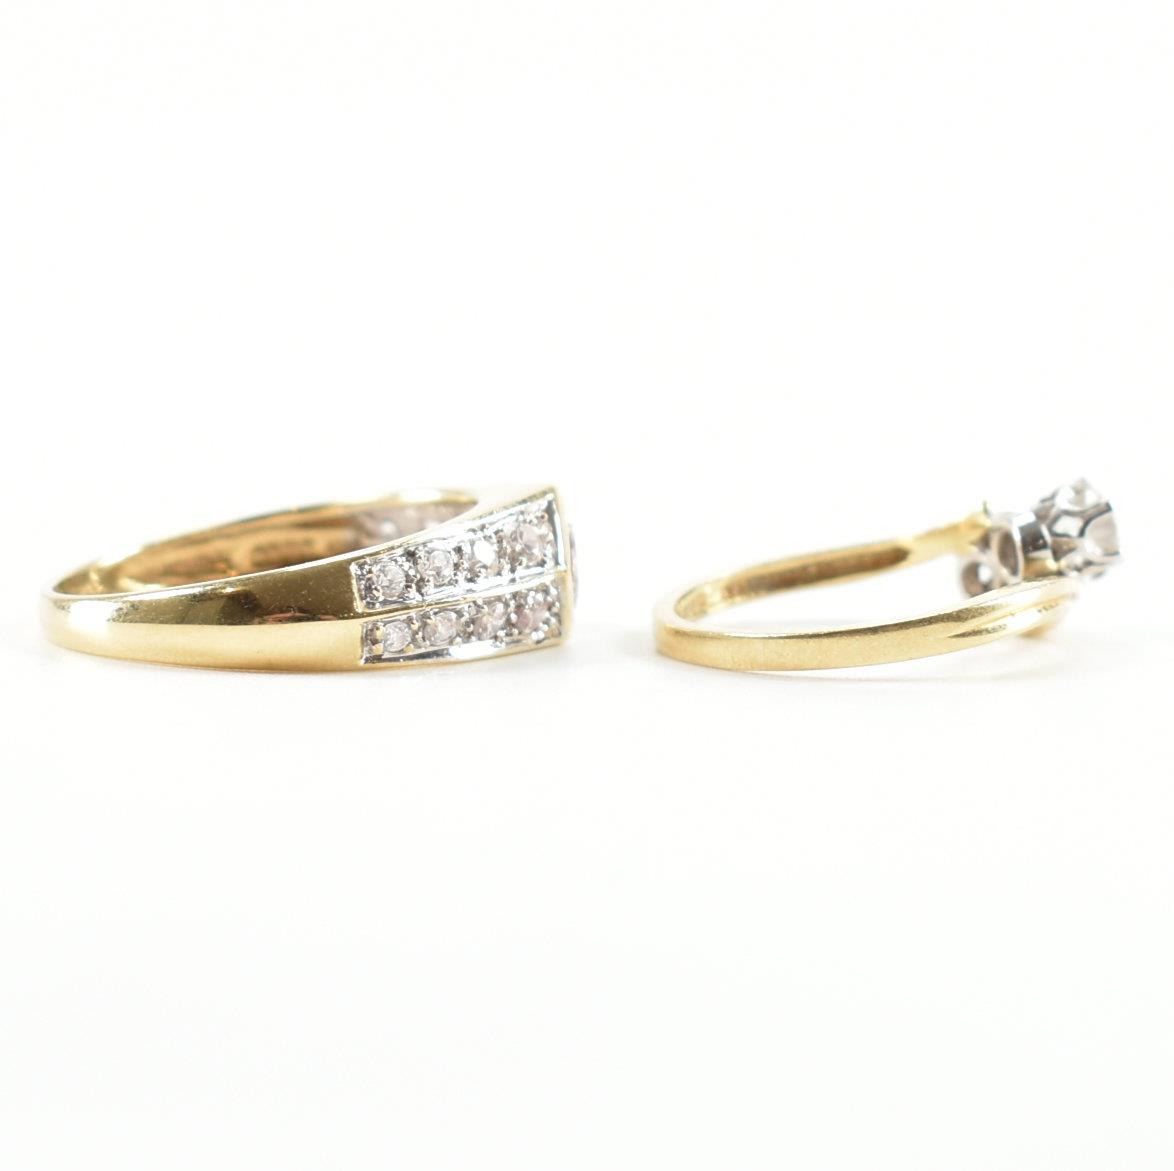 TWO HALLMARKED 14CT GOLD & CZ DRESS RINGS - Image 5 of 10